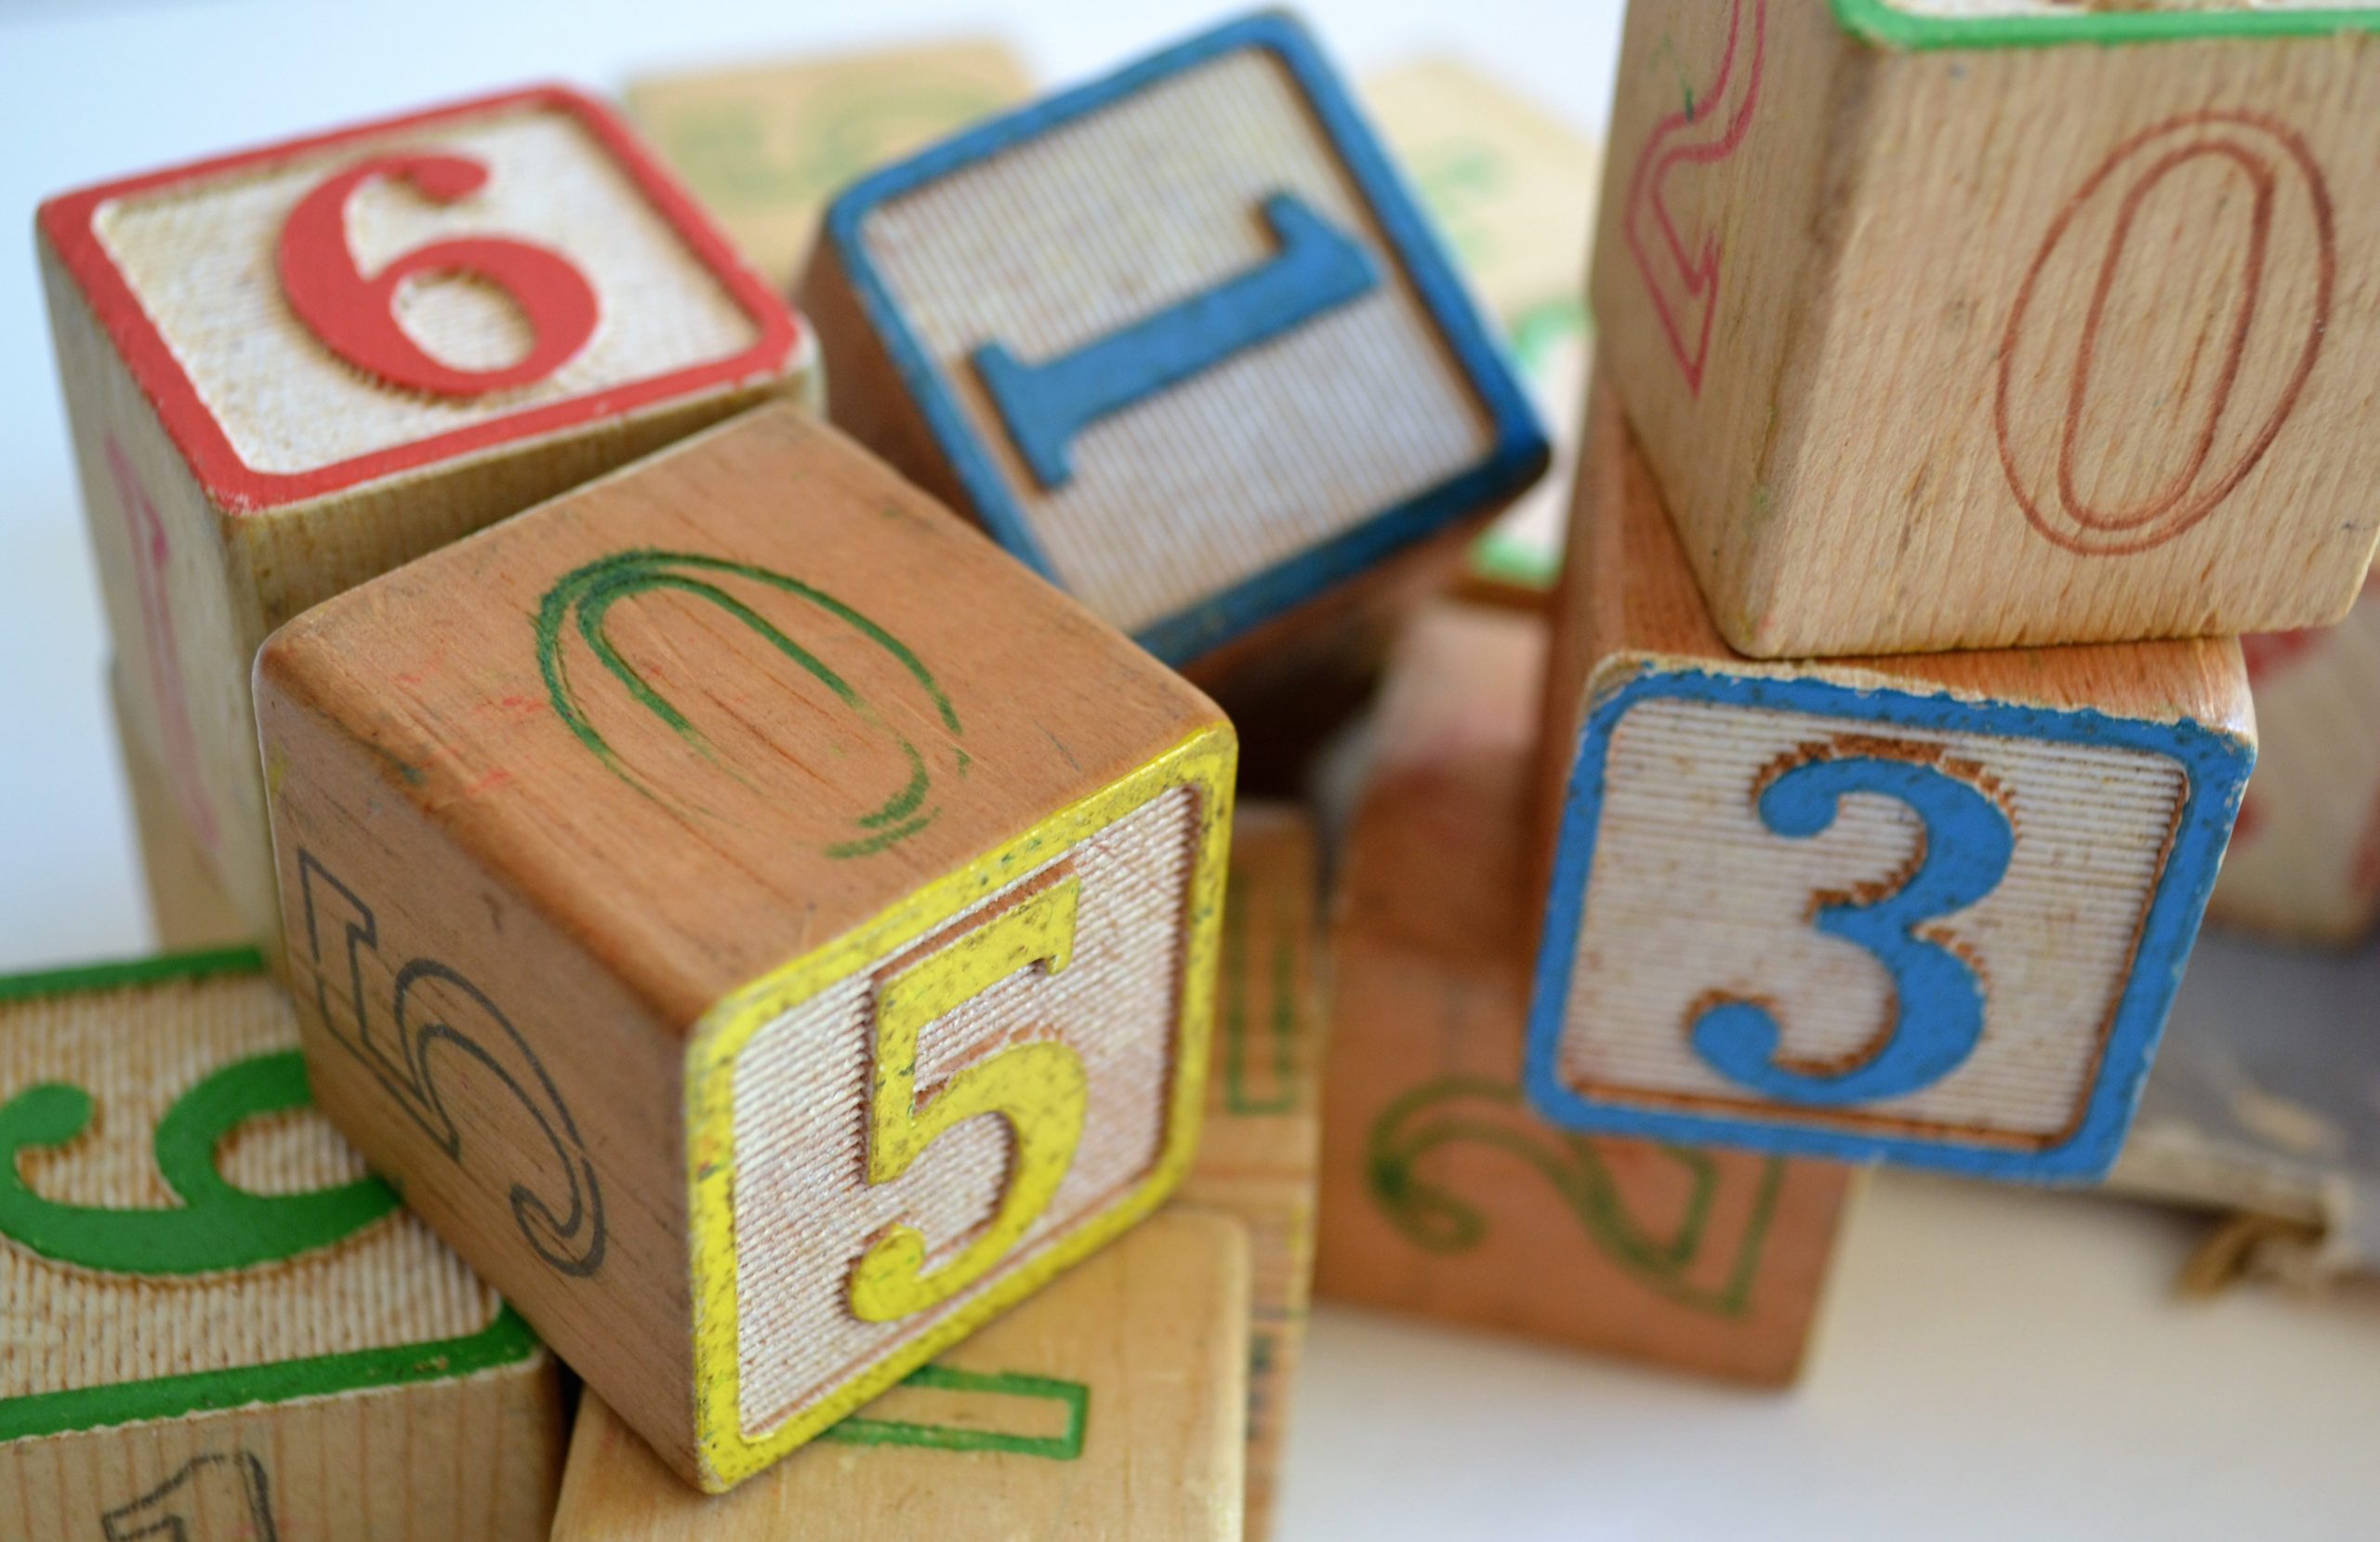 Pile of older style, children's wooden number and ABC blocks